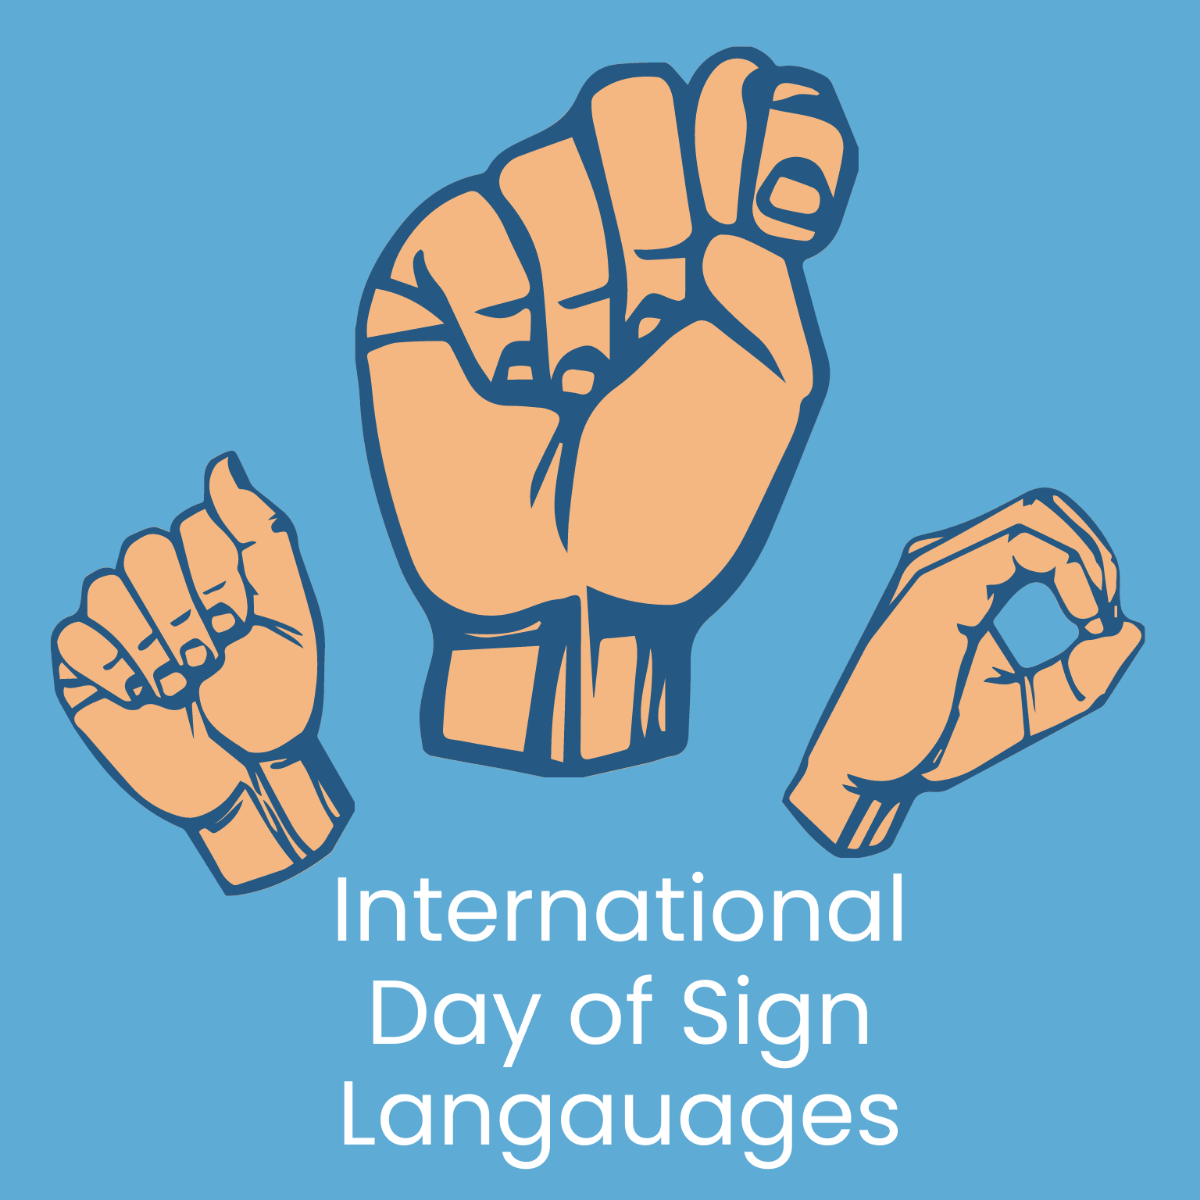 Free International Day of Sign Languages Illustration Template